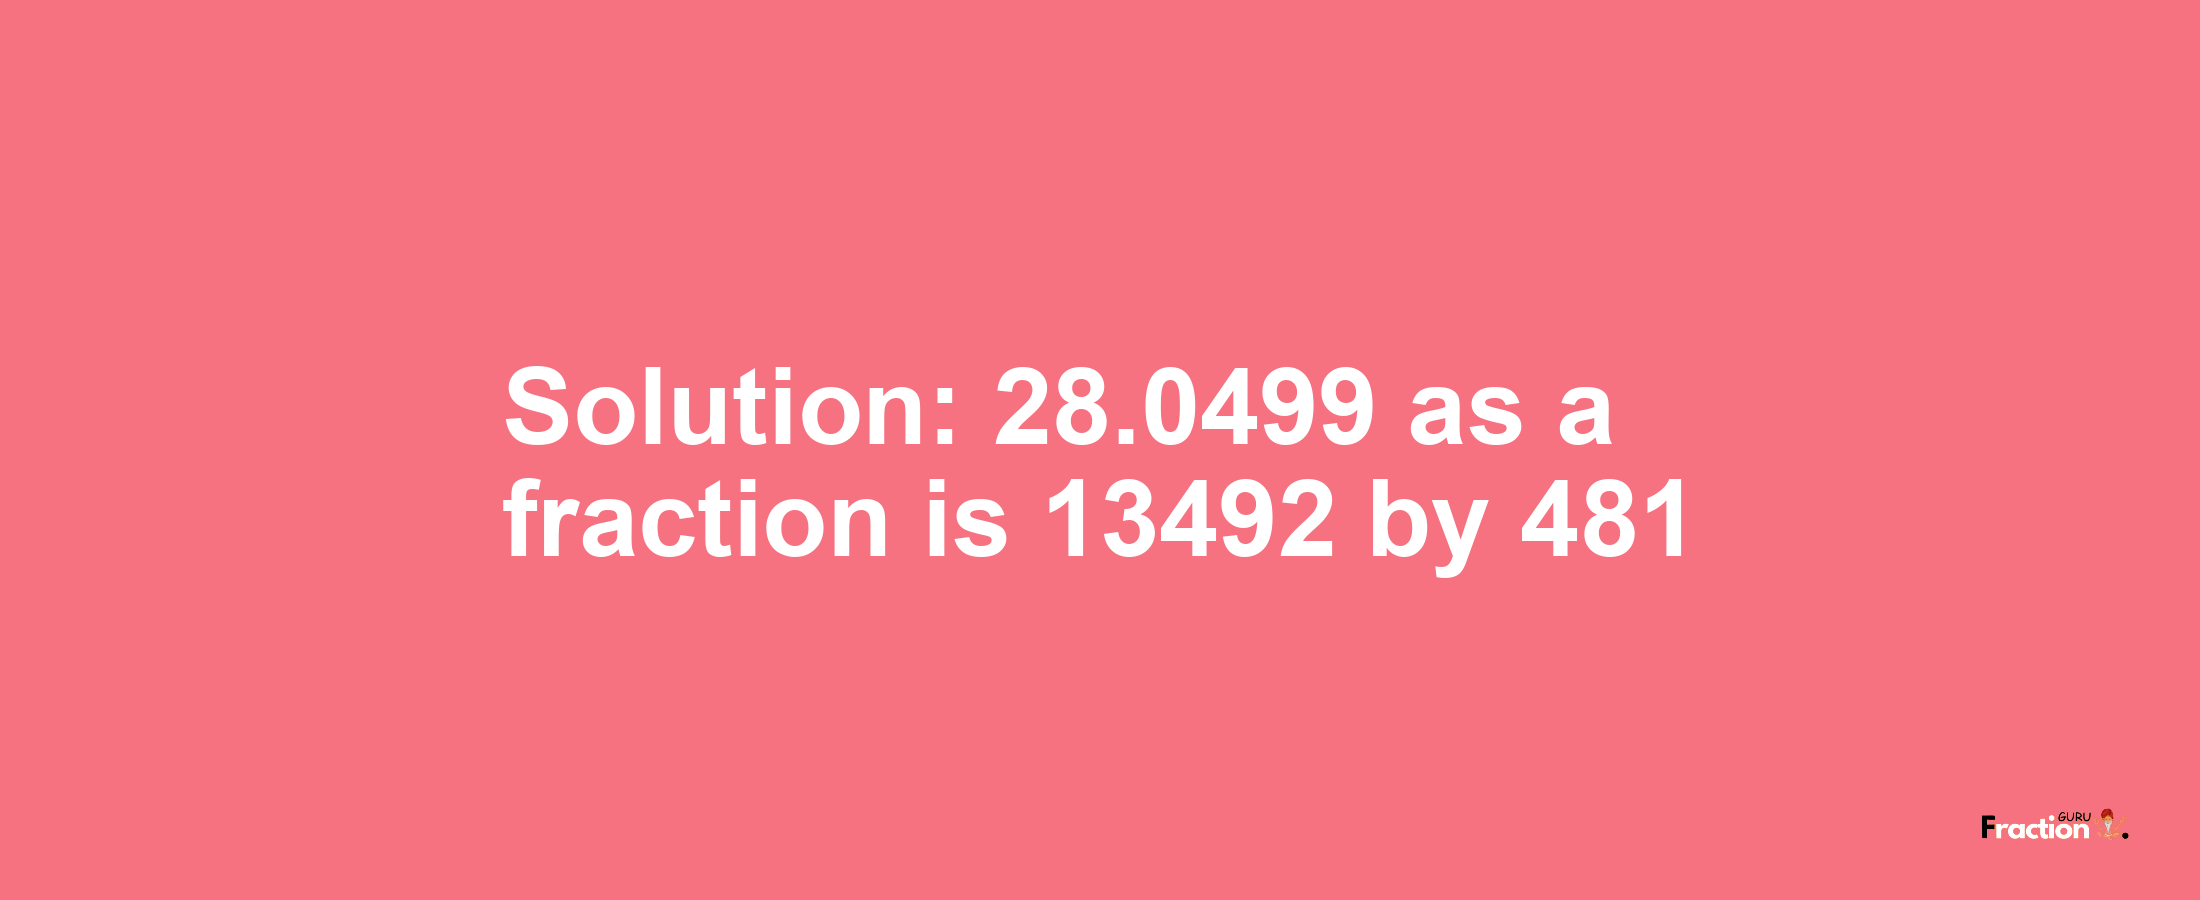 Solution:28.0499 as a fraction is 13492/481